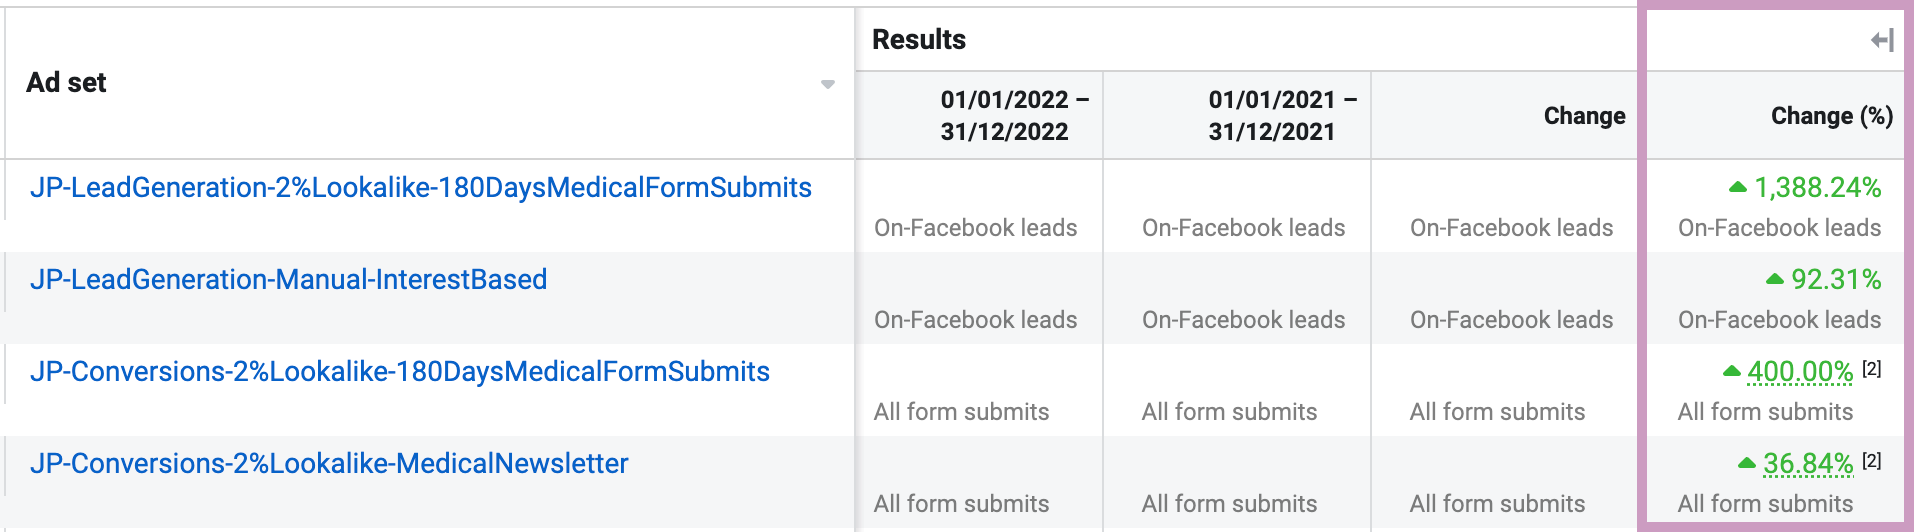 On-Facebook and all form submit leads generated through B2B Facebook ads